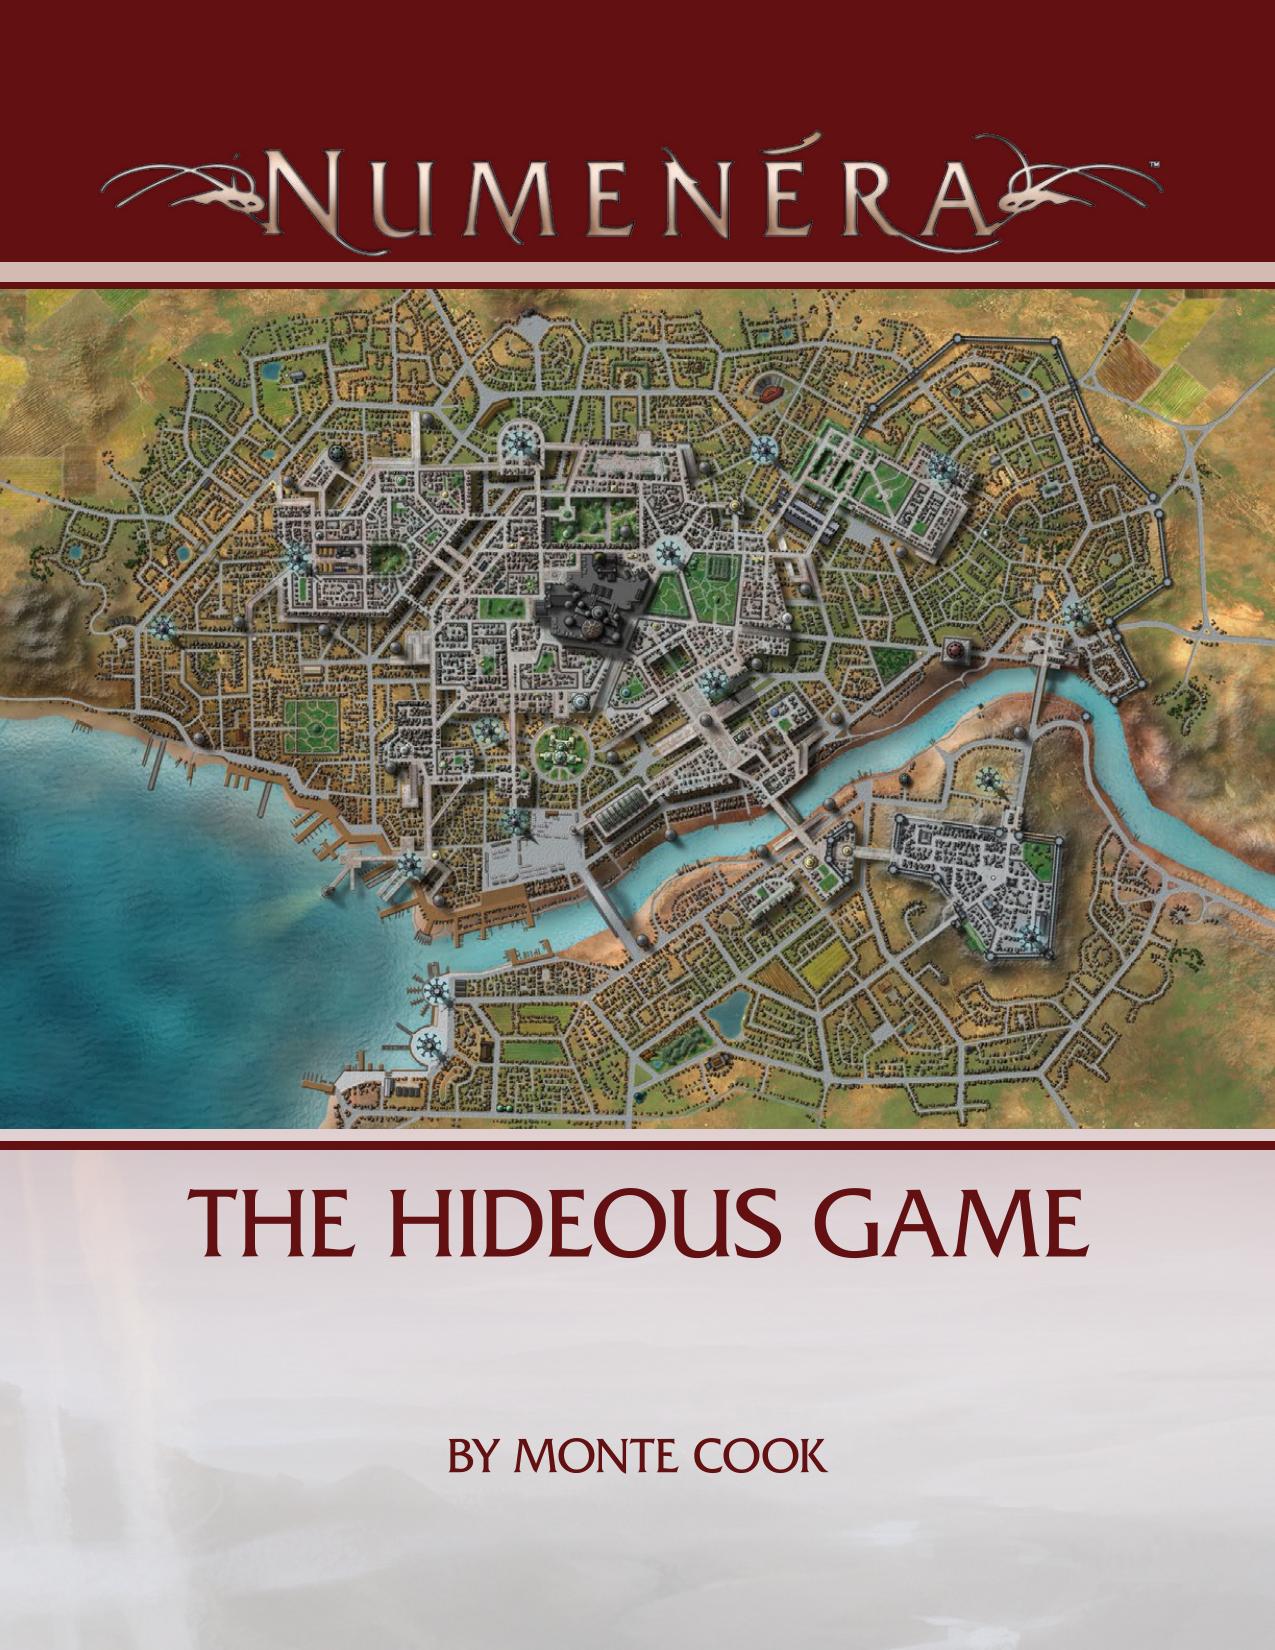 The Hideous Game